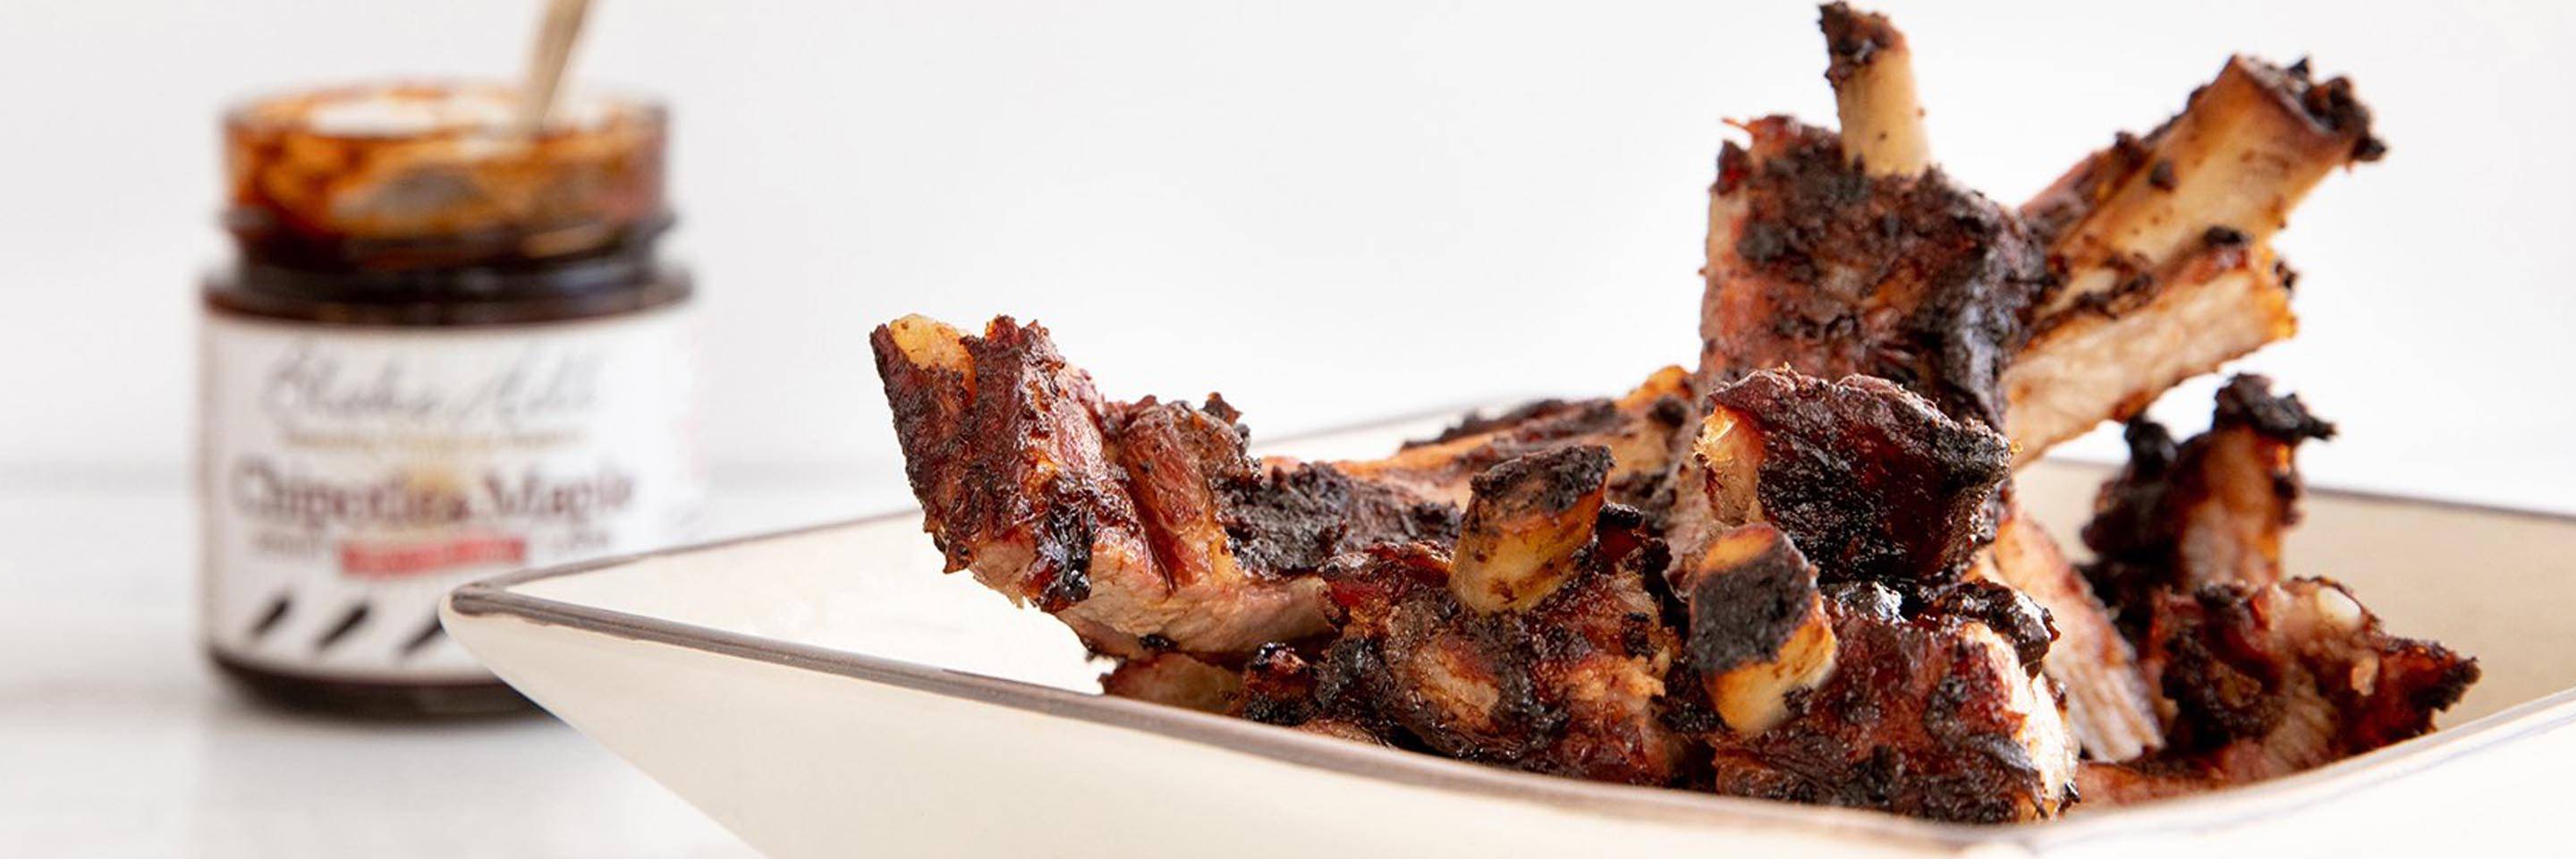 Spicy Chipotle Maple Ribs with Blake Hill Jam